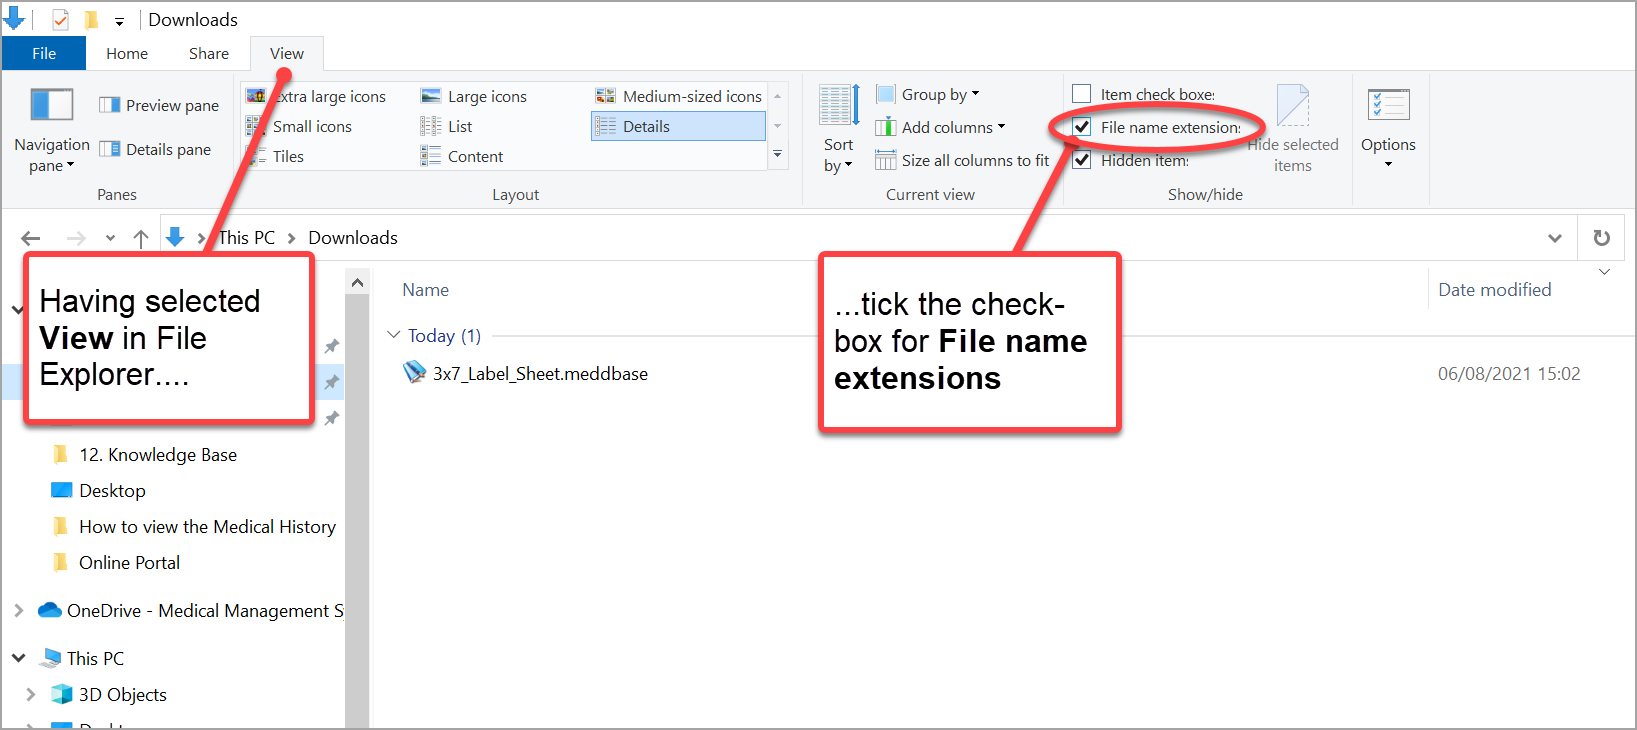 File Explorer window displaying View tab with annotations to advise on ticking file name extensions check-box